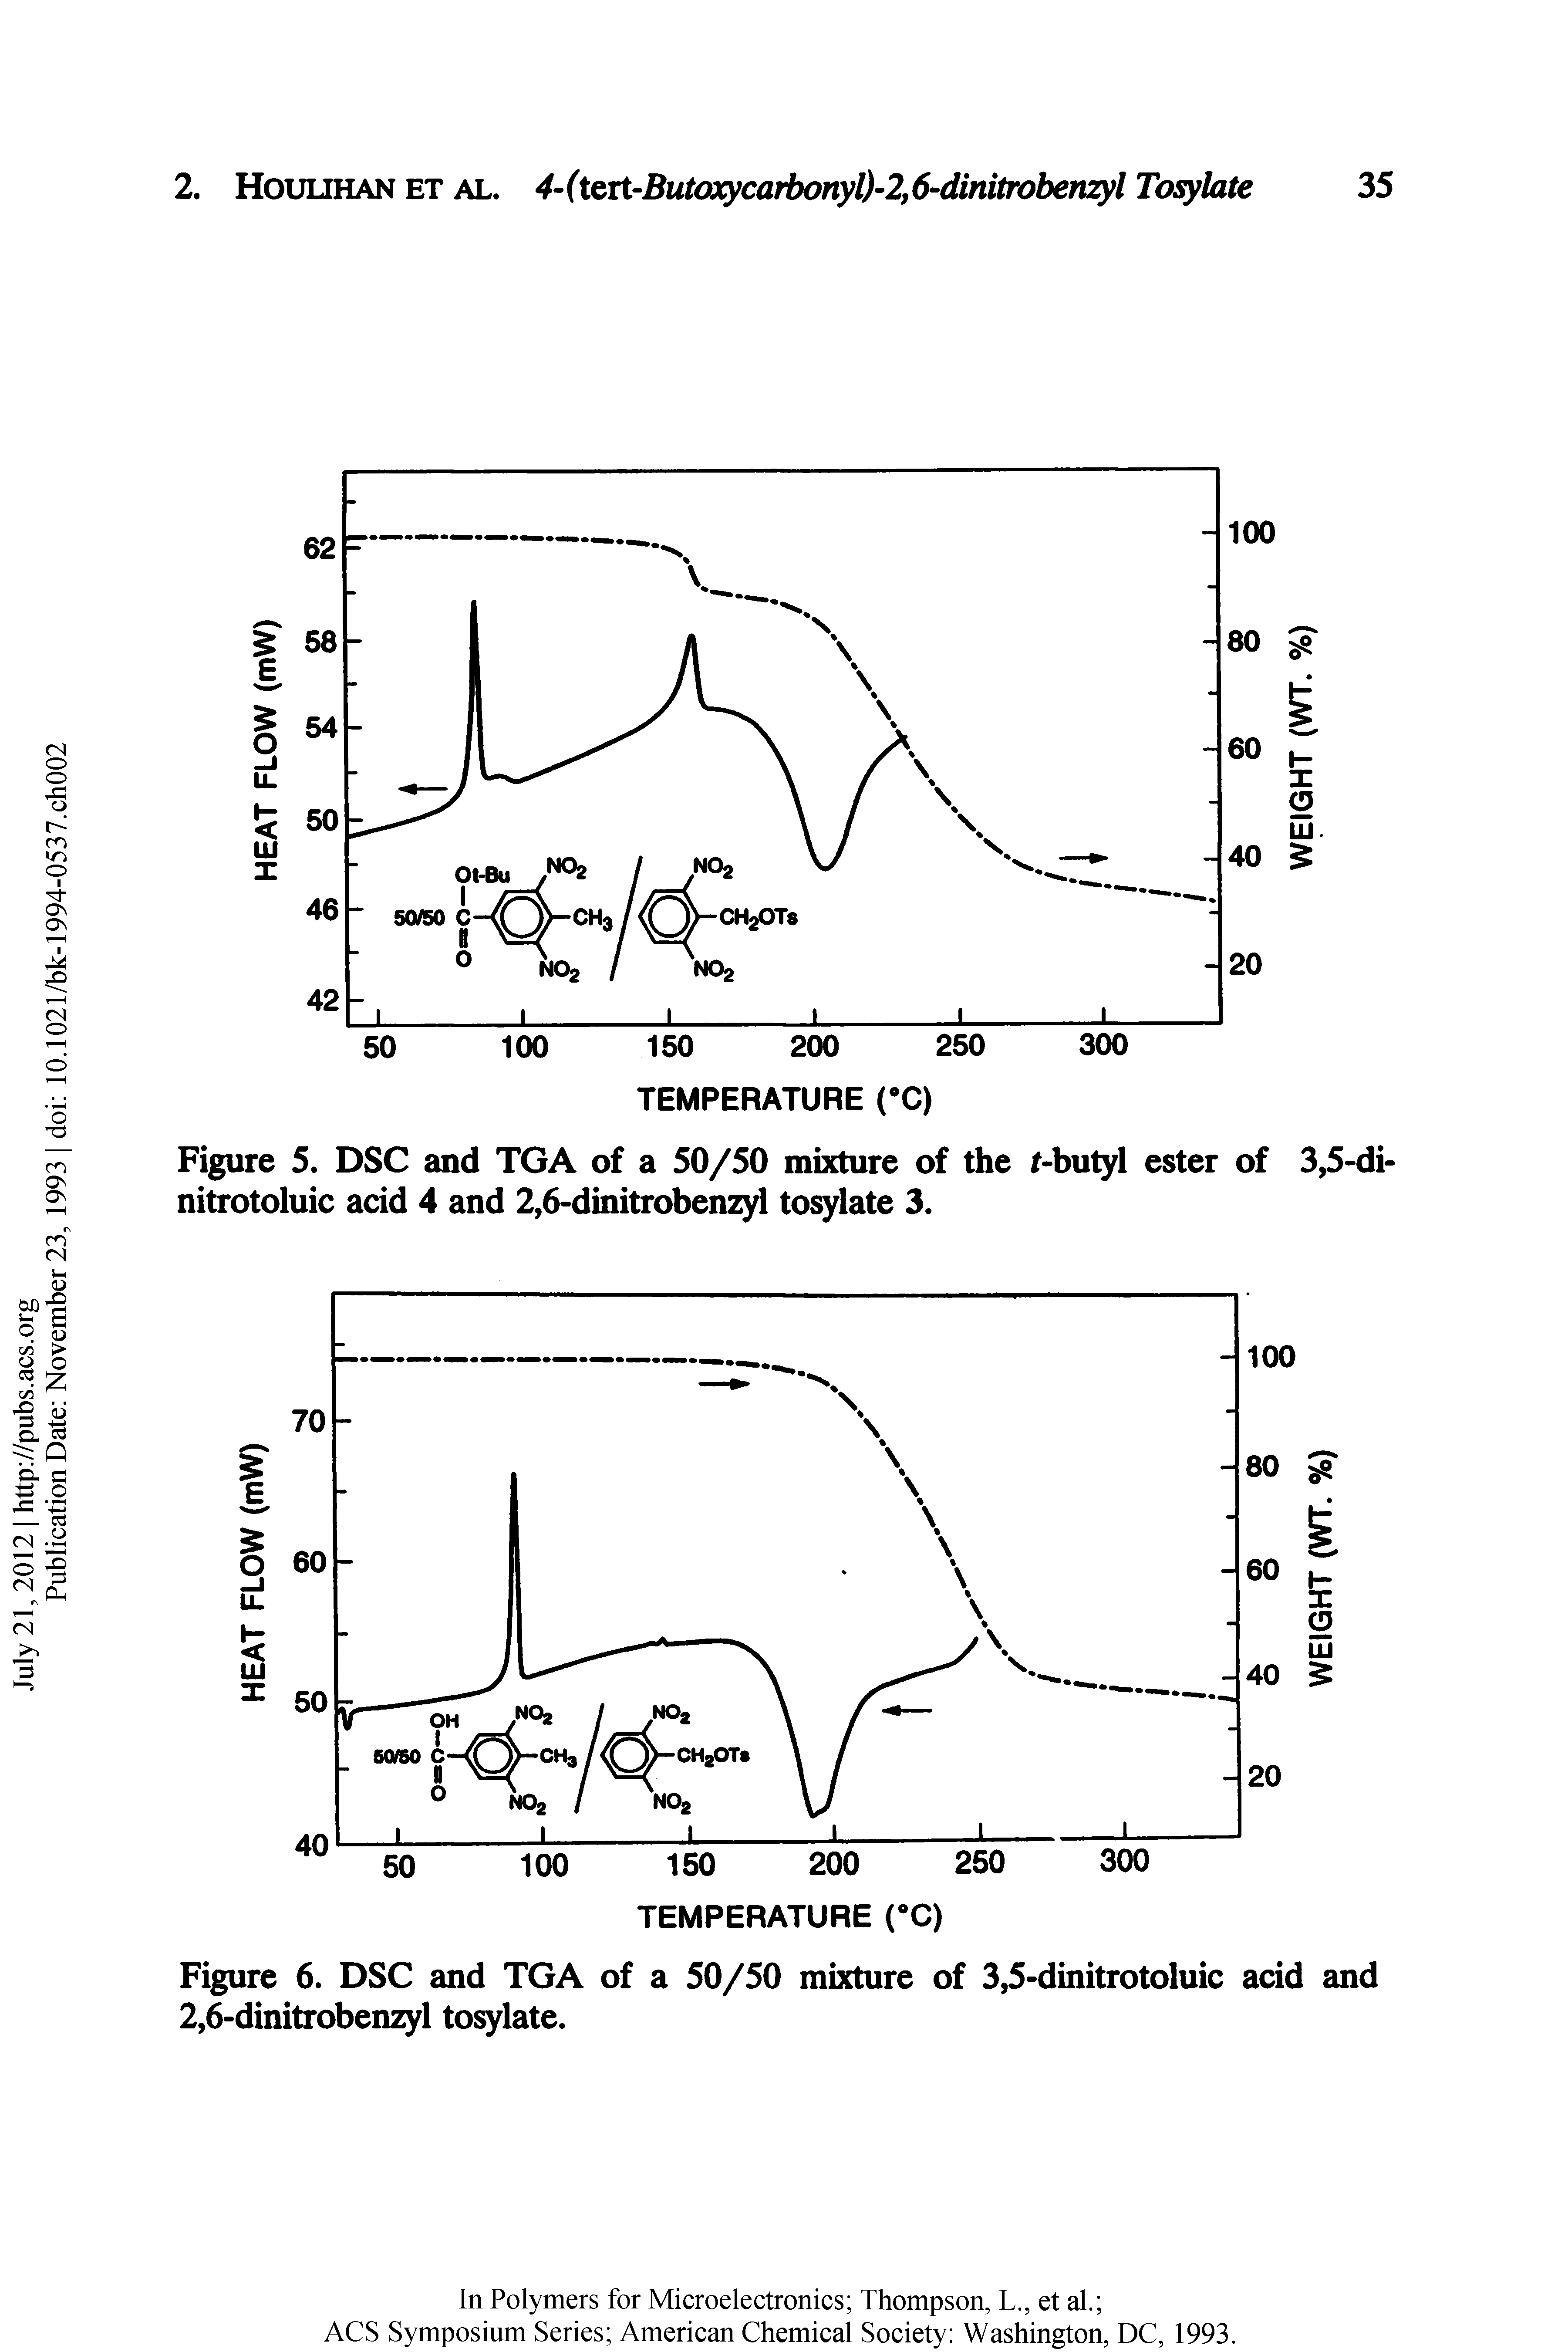 Figure 5. DSC and TGA of a 50/50 mixture of the r-butyl ester of 3 -di-nitrotoluic acid 4 and 2,6-dinitrobenzyl tosylate 3.